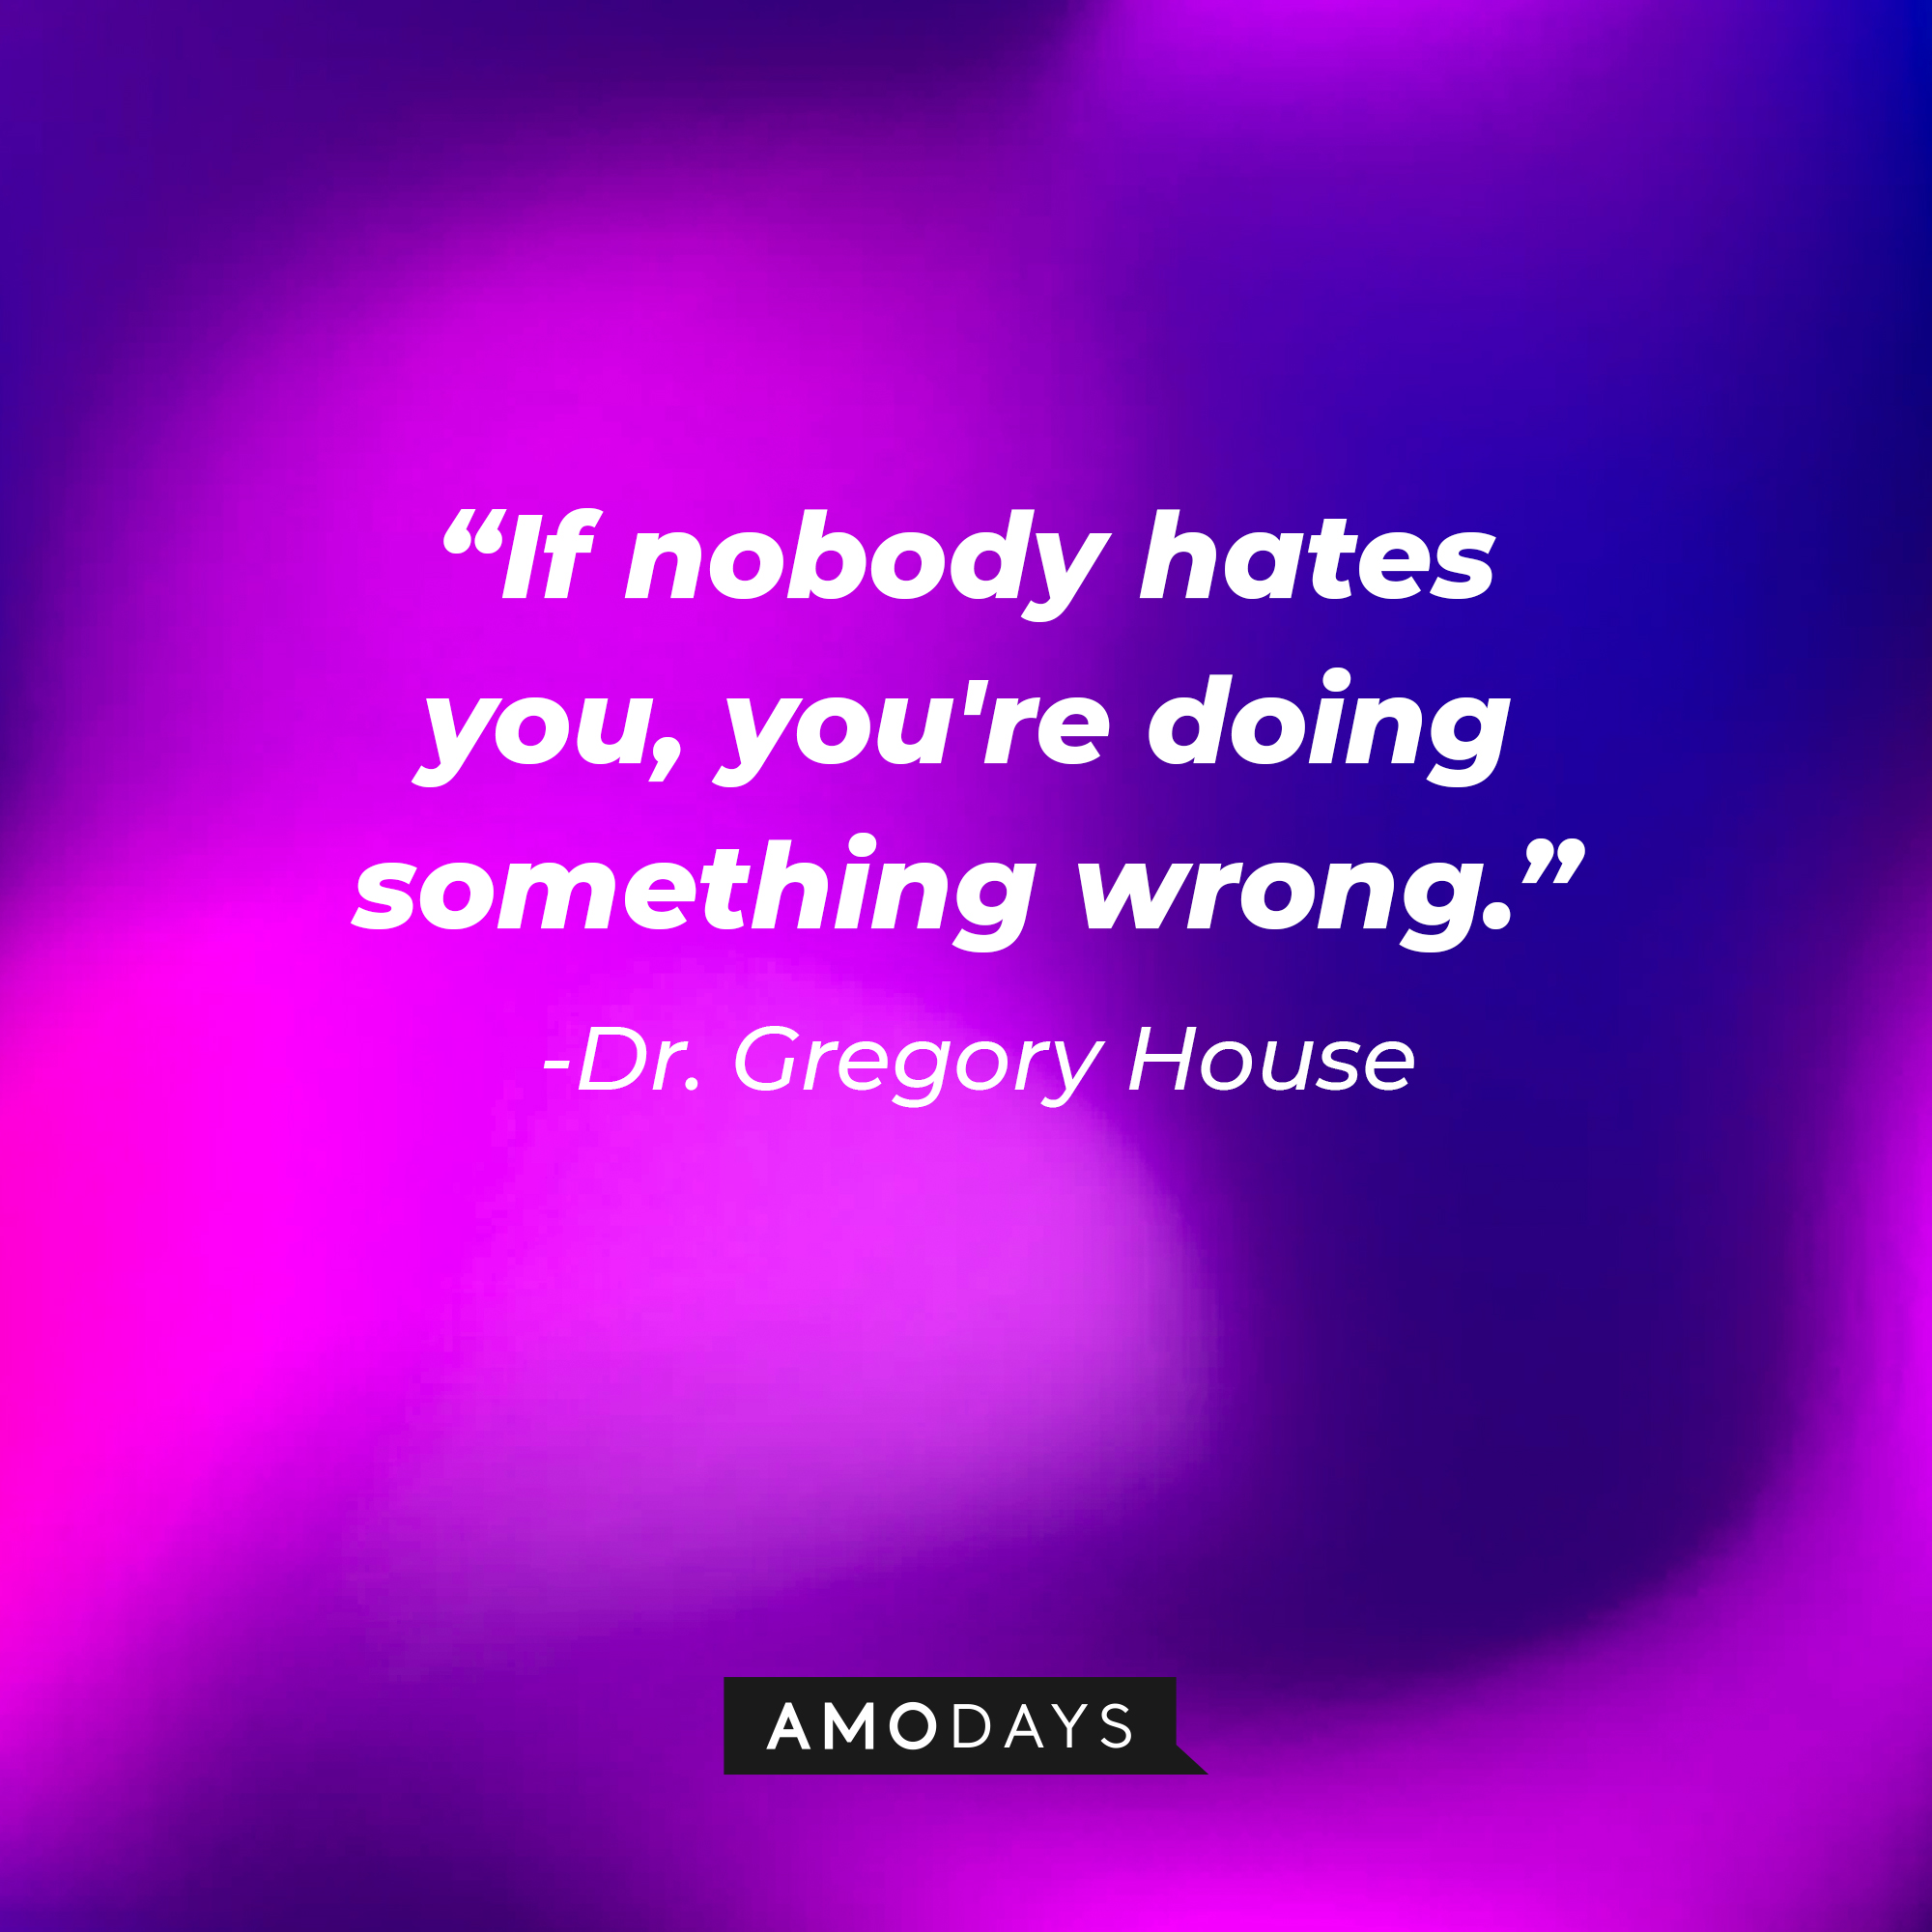 Dr. Gregory House’s quote: “If nobody hates you, you're doing something wrong.” | Source: AmoDays